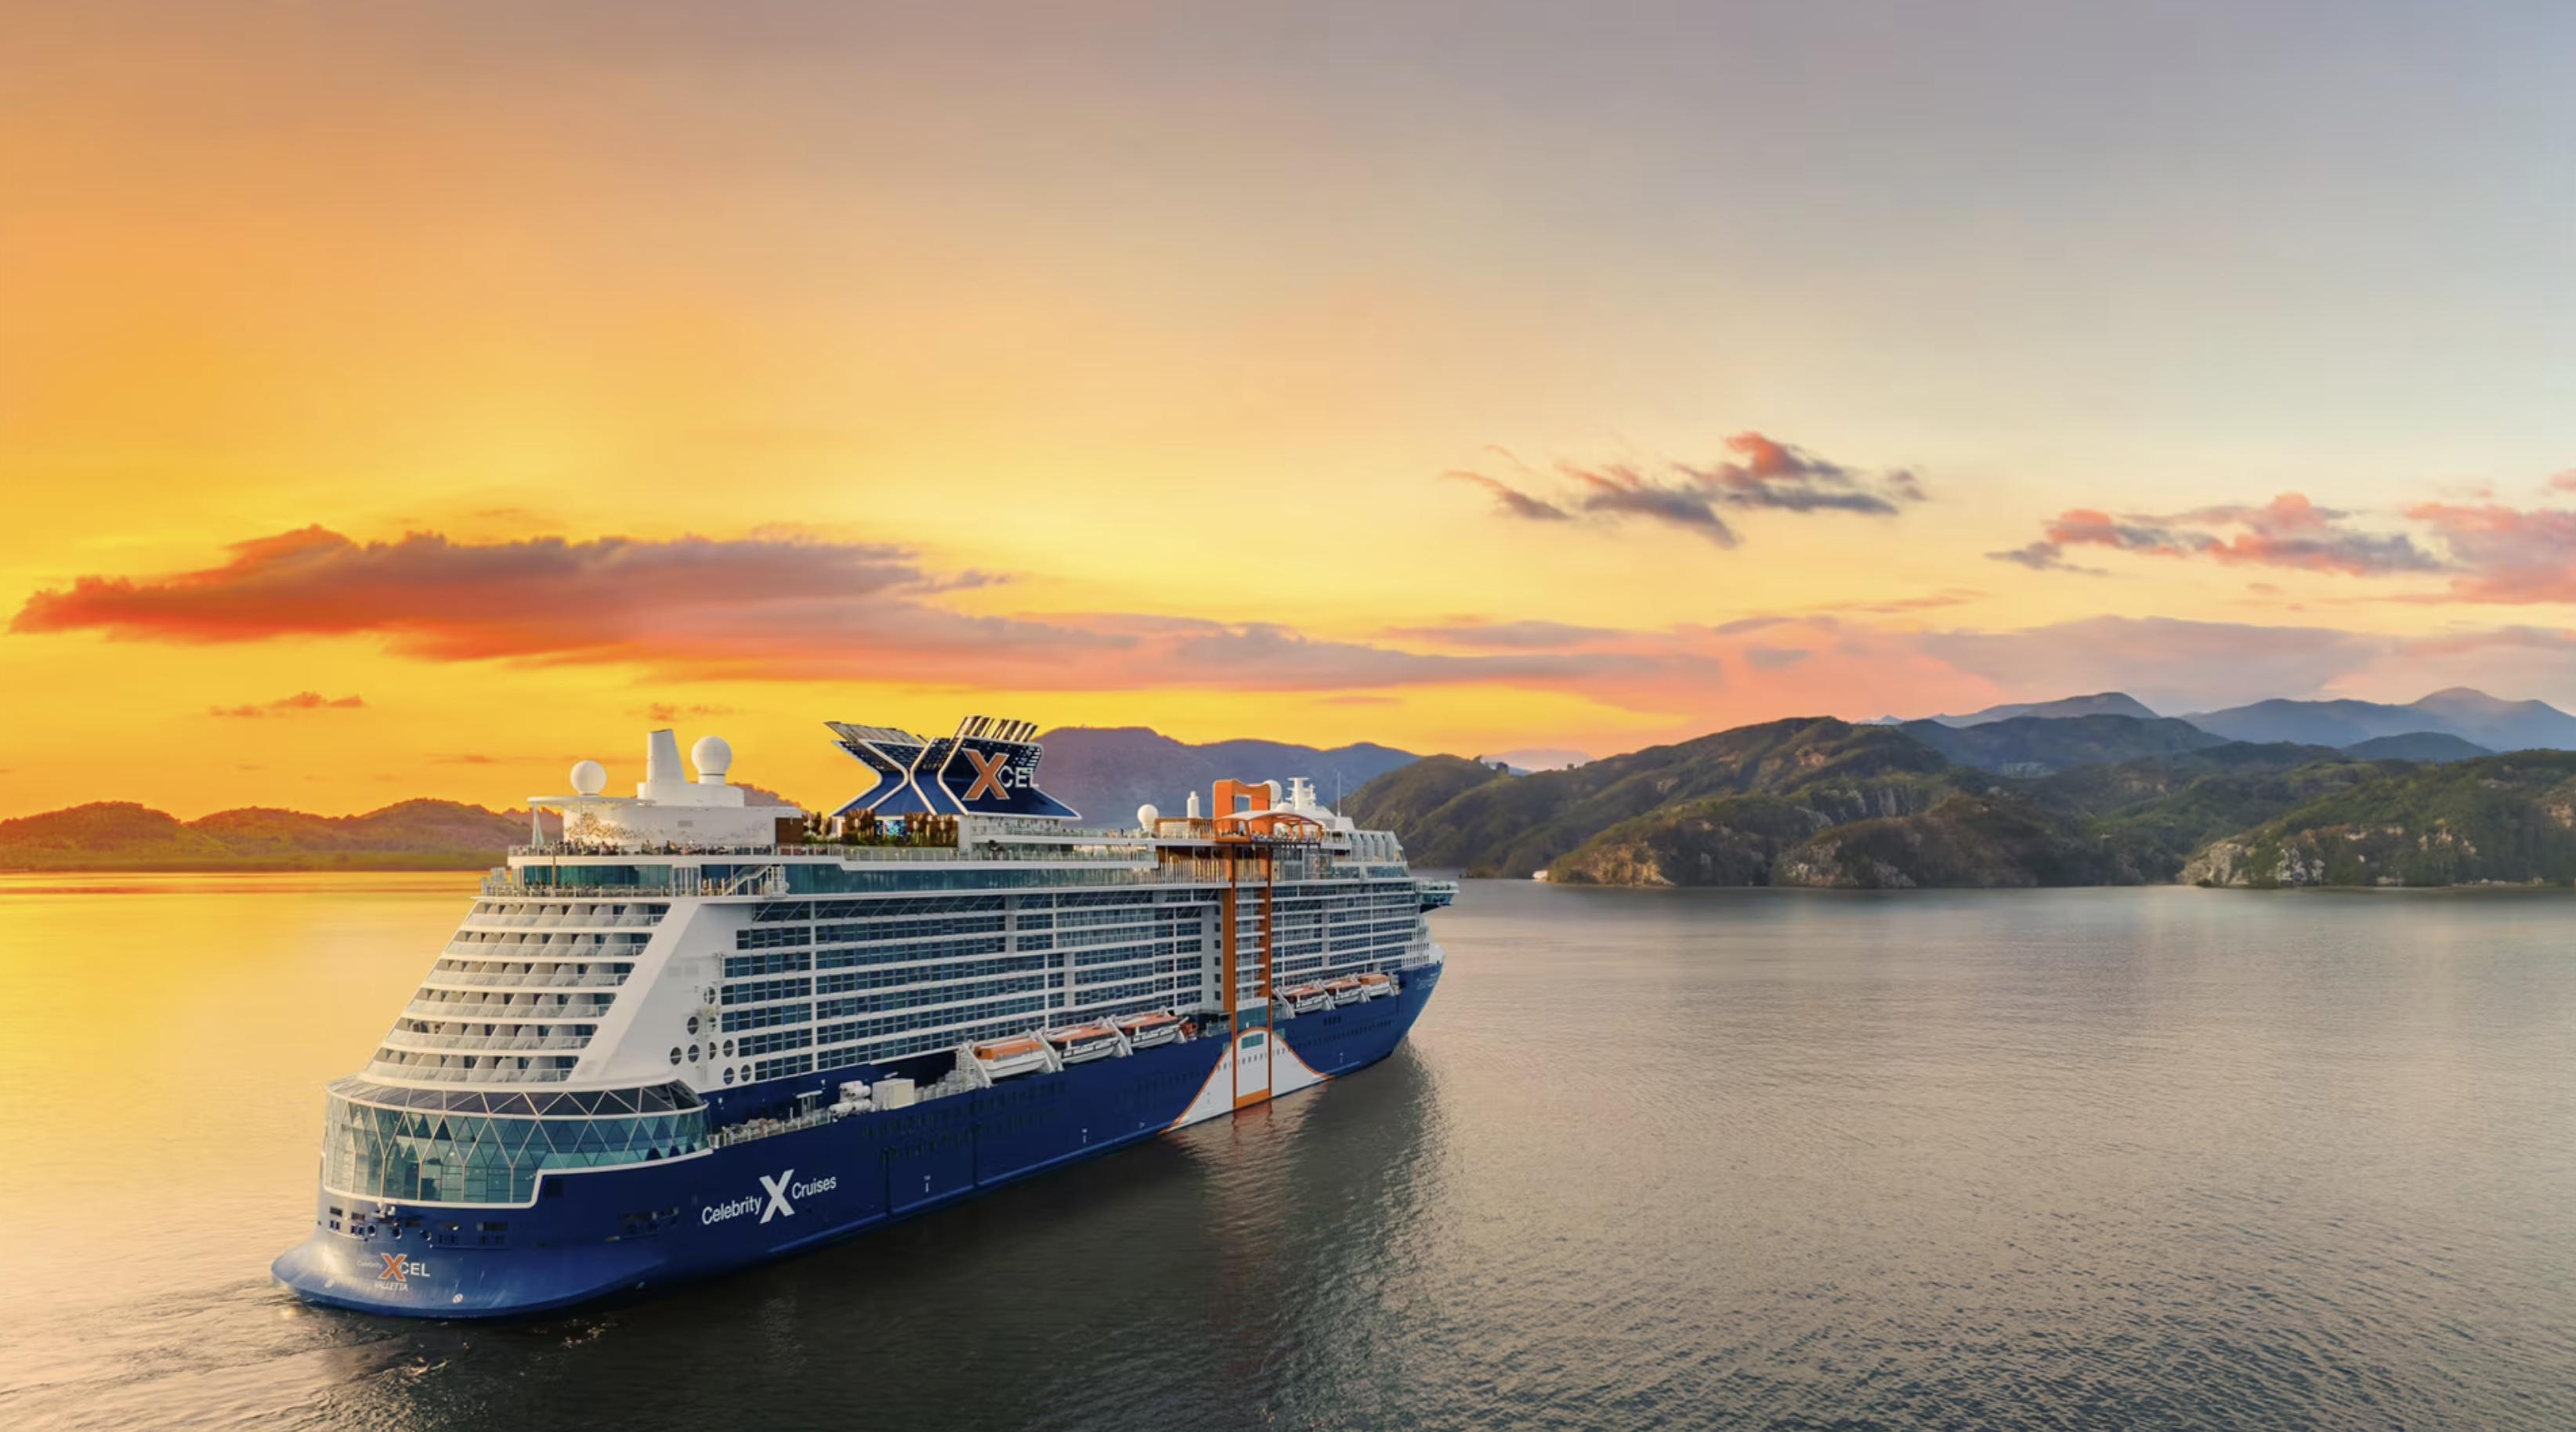 Celebrity Xcel as the newest vessel of Celebrity Cruises